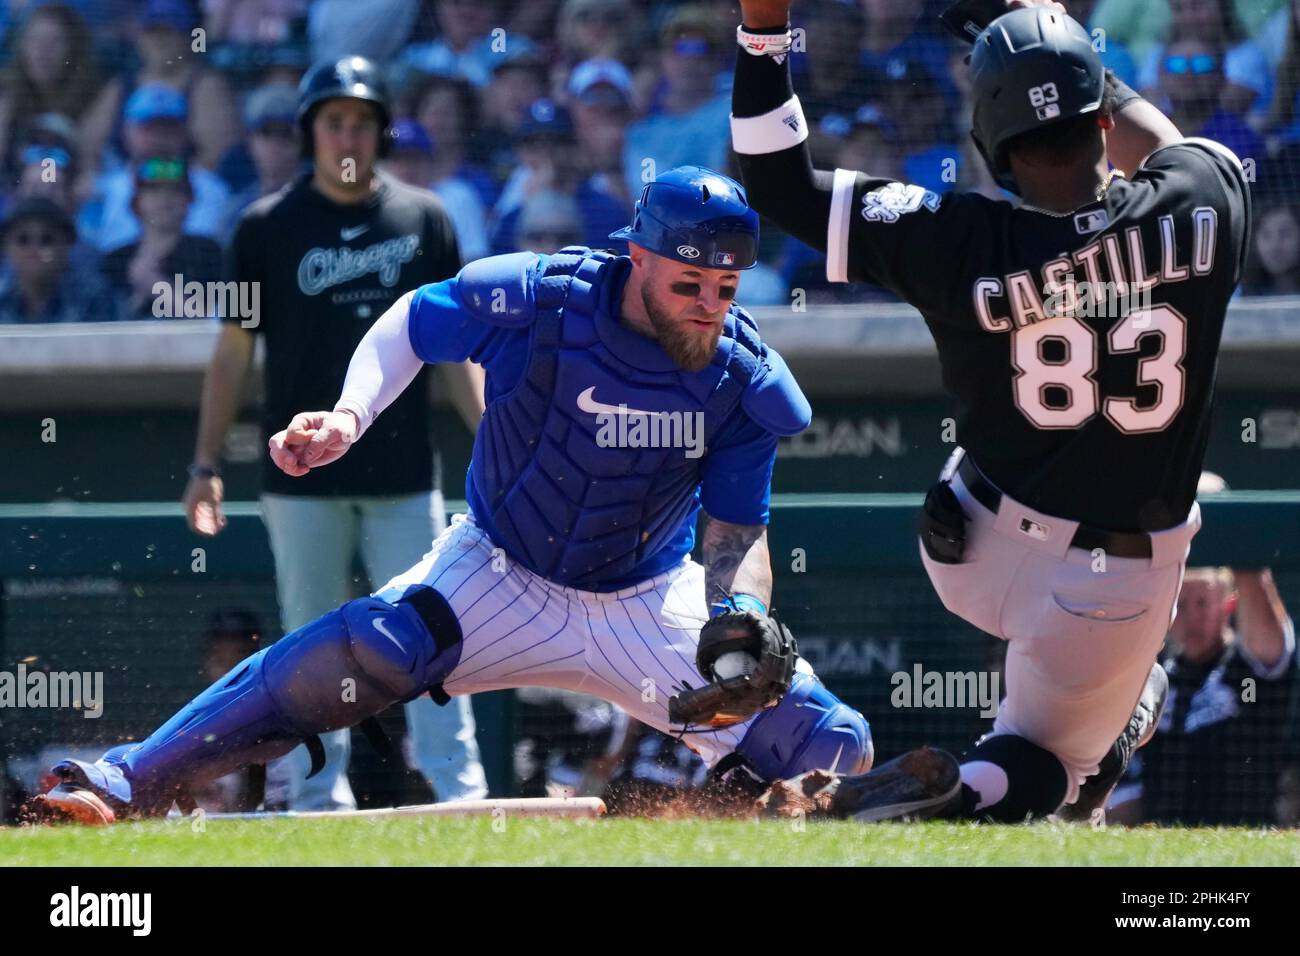 Chicago Cubs catcher Tucker Barnhart, left, tags out Chicago White Sox's  Moises Castillo (83) trying to score a run during the second inning of a  spring training baseball game Tuesday, March 28